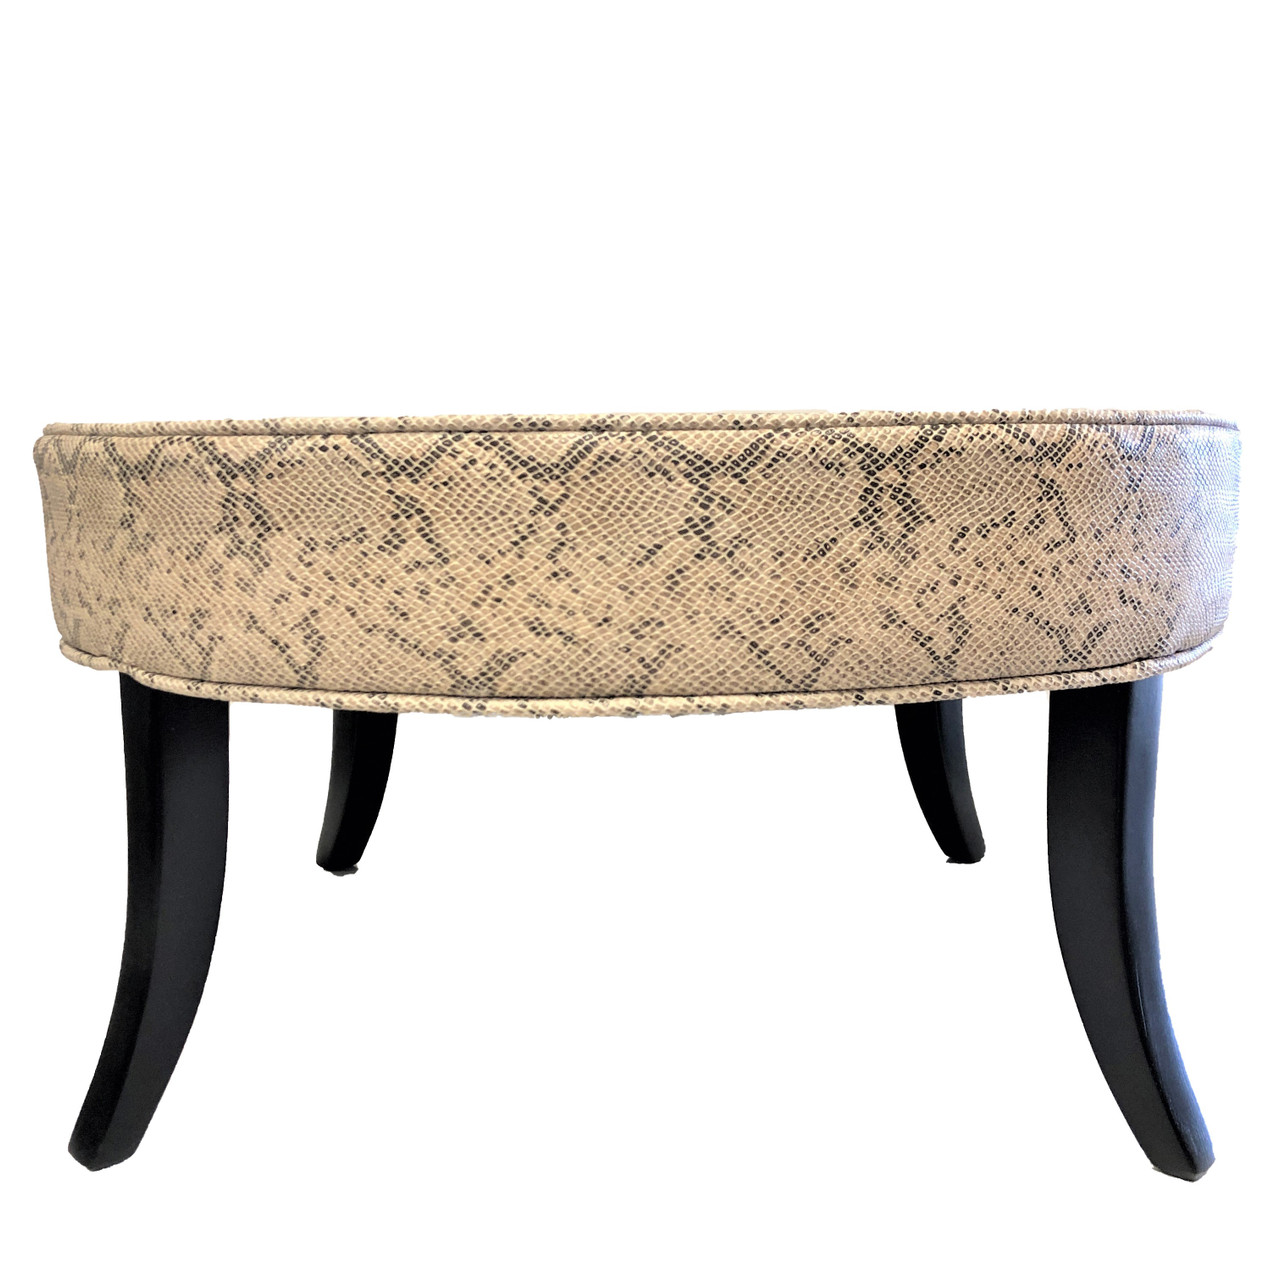 Faux Python Leather Table